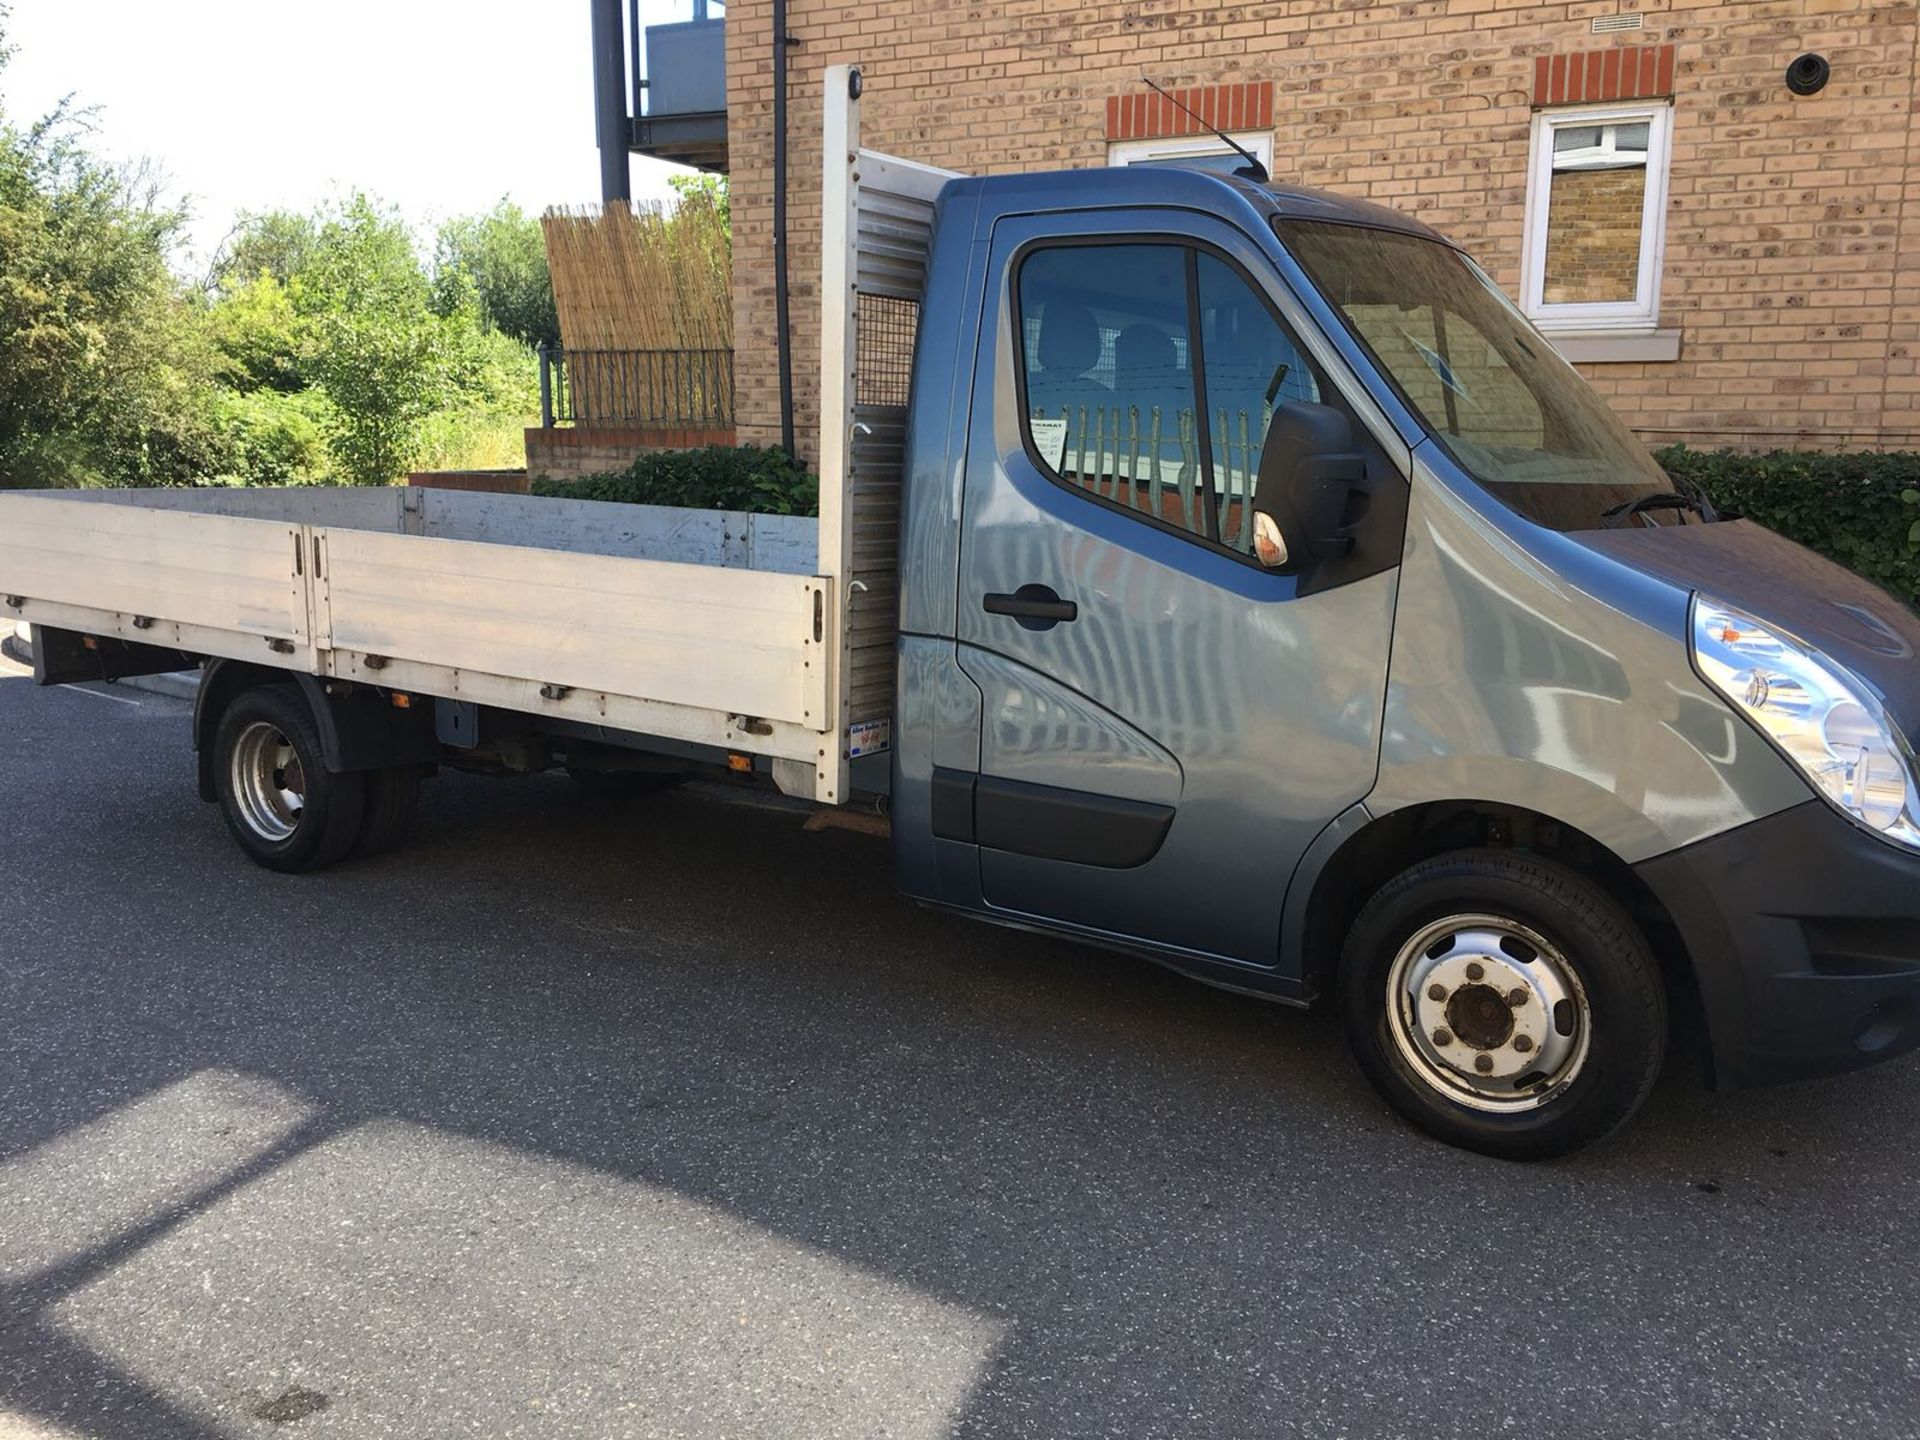 2012 RENAULT MASTER 2.3 DCI LL35 DROPSIDE PICKUP 3.5 TON GROSS TWIN WHEEL. 137,000 MILES. - Image 8 of 26